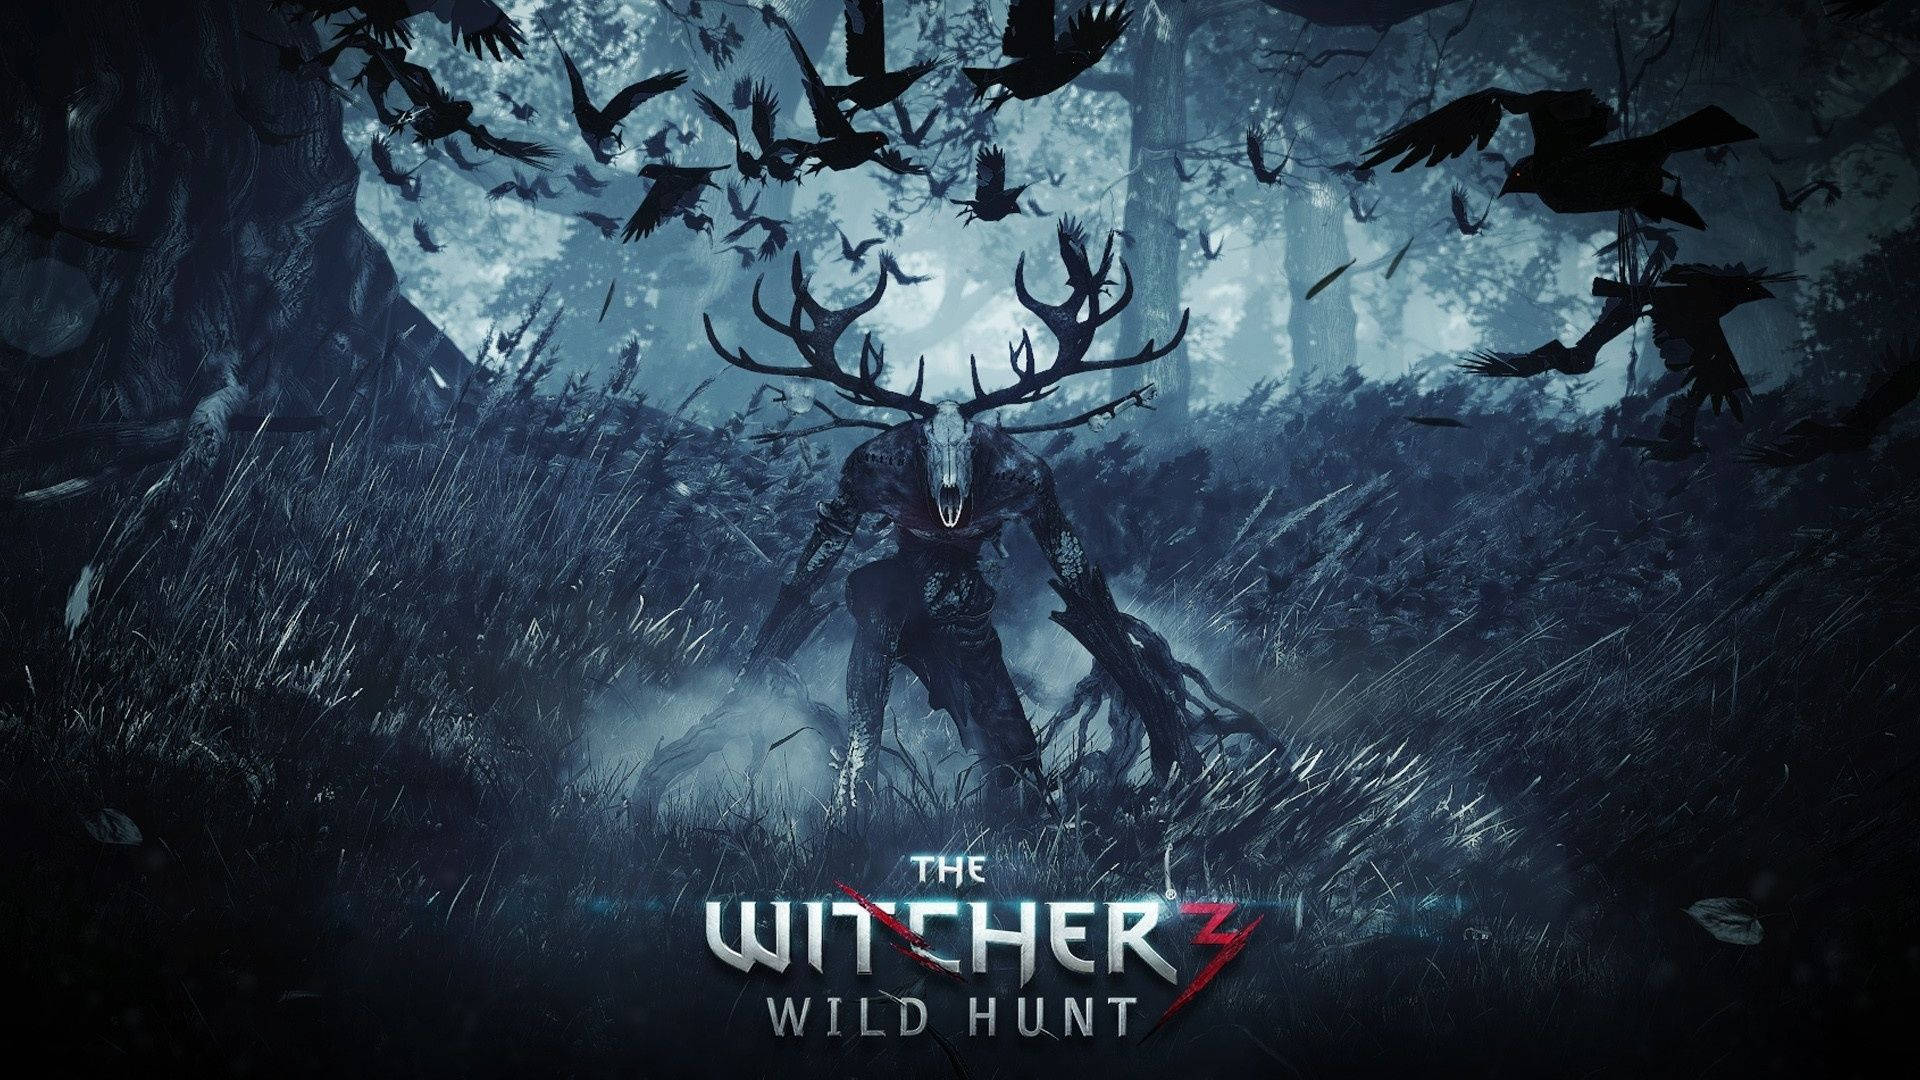 The Witcher 3 Leshy wallpaper.